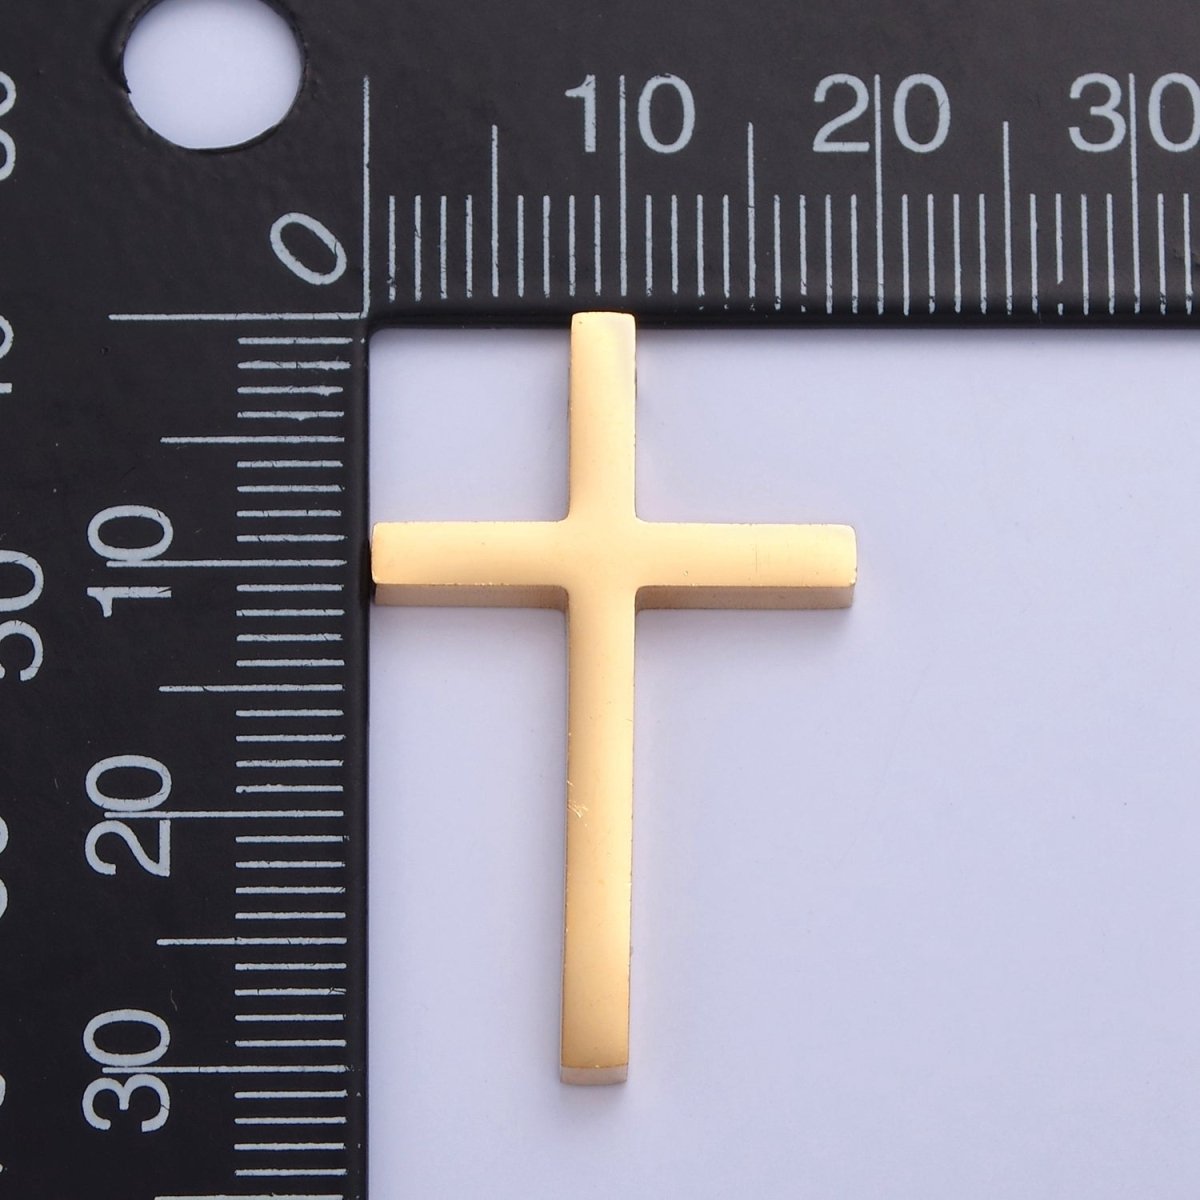 Stainless Steel Religious Cross For Jewelry Making, Silver & Gold Boys Bead For Necklace Making, W-841 W-842 - DLUXCA